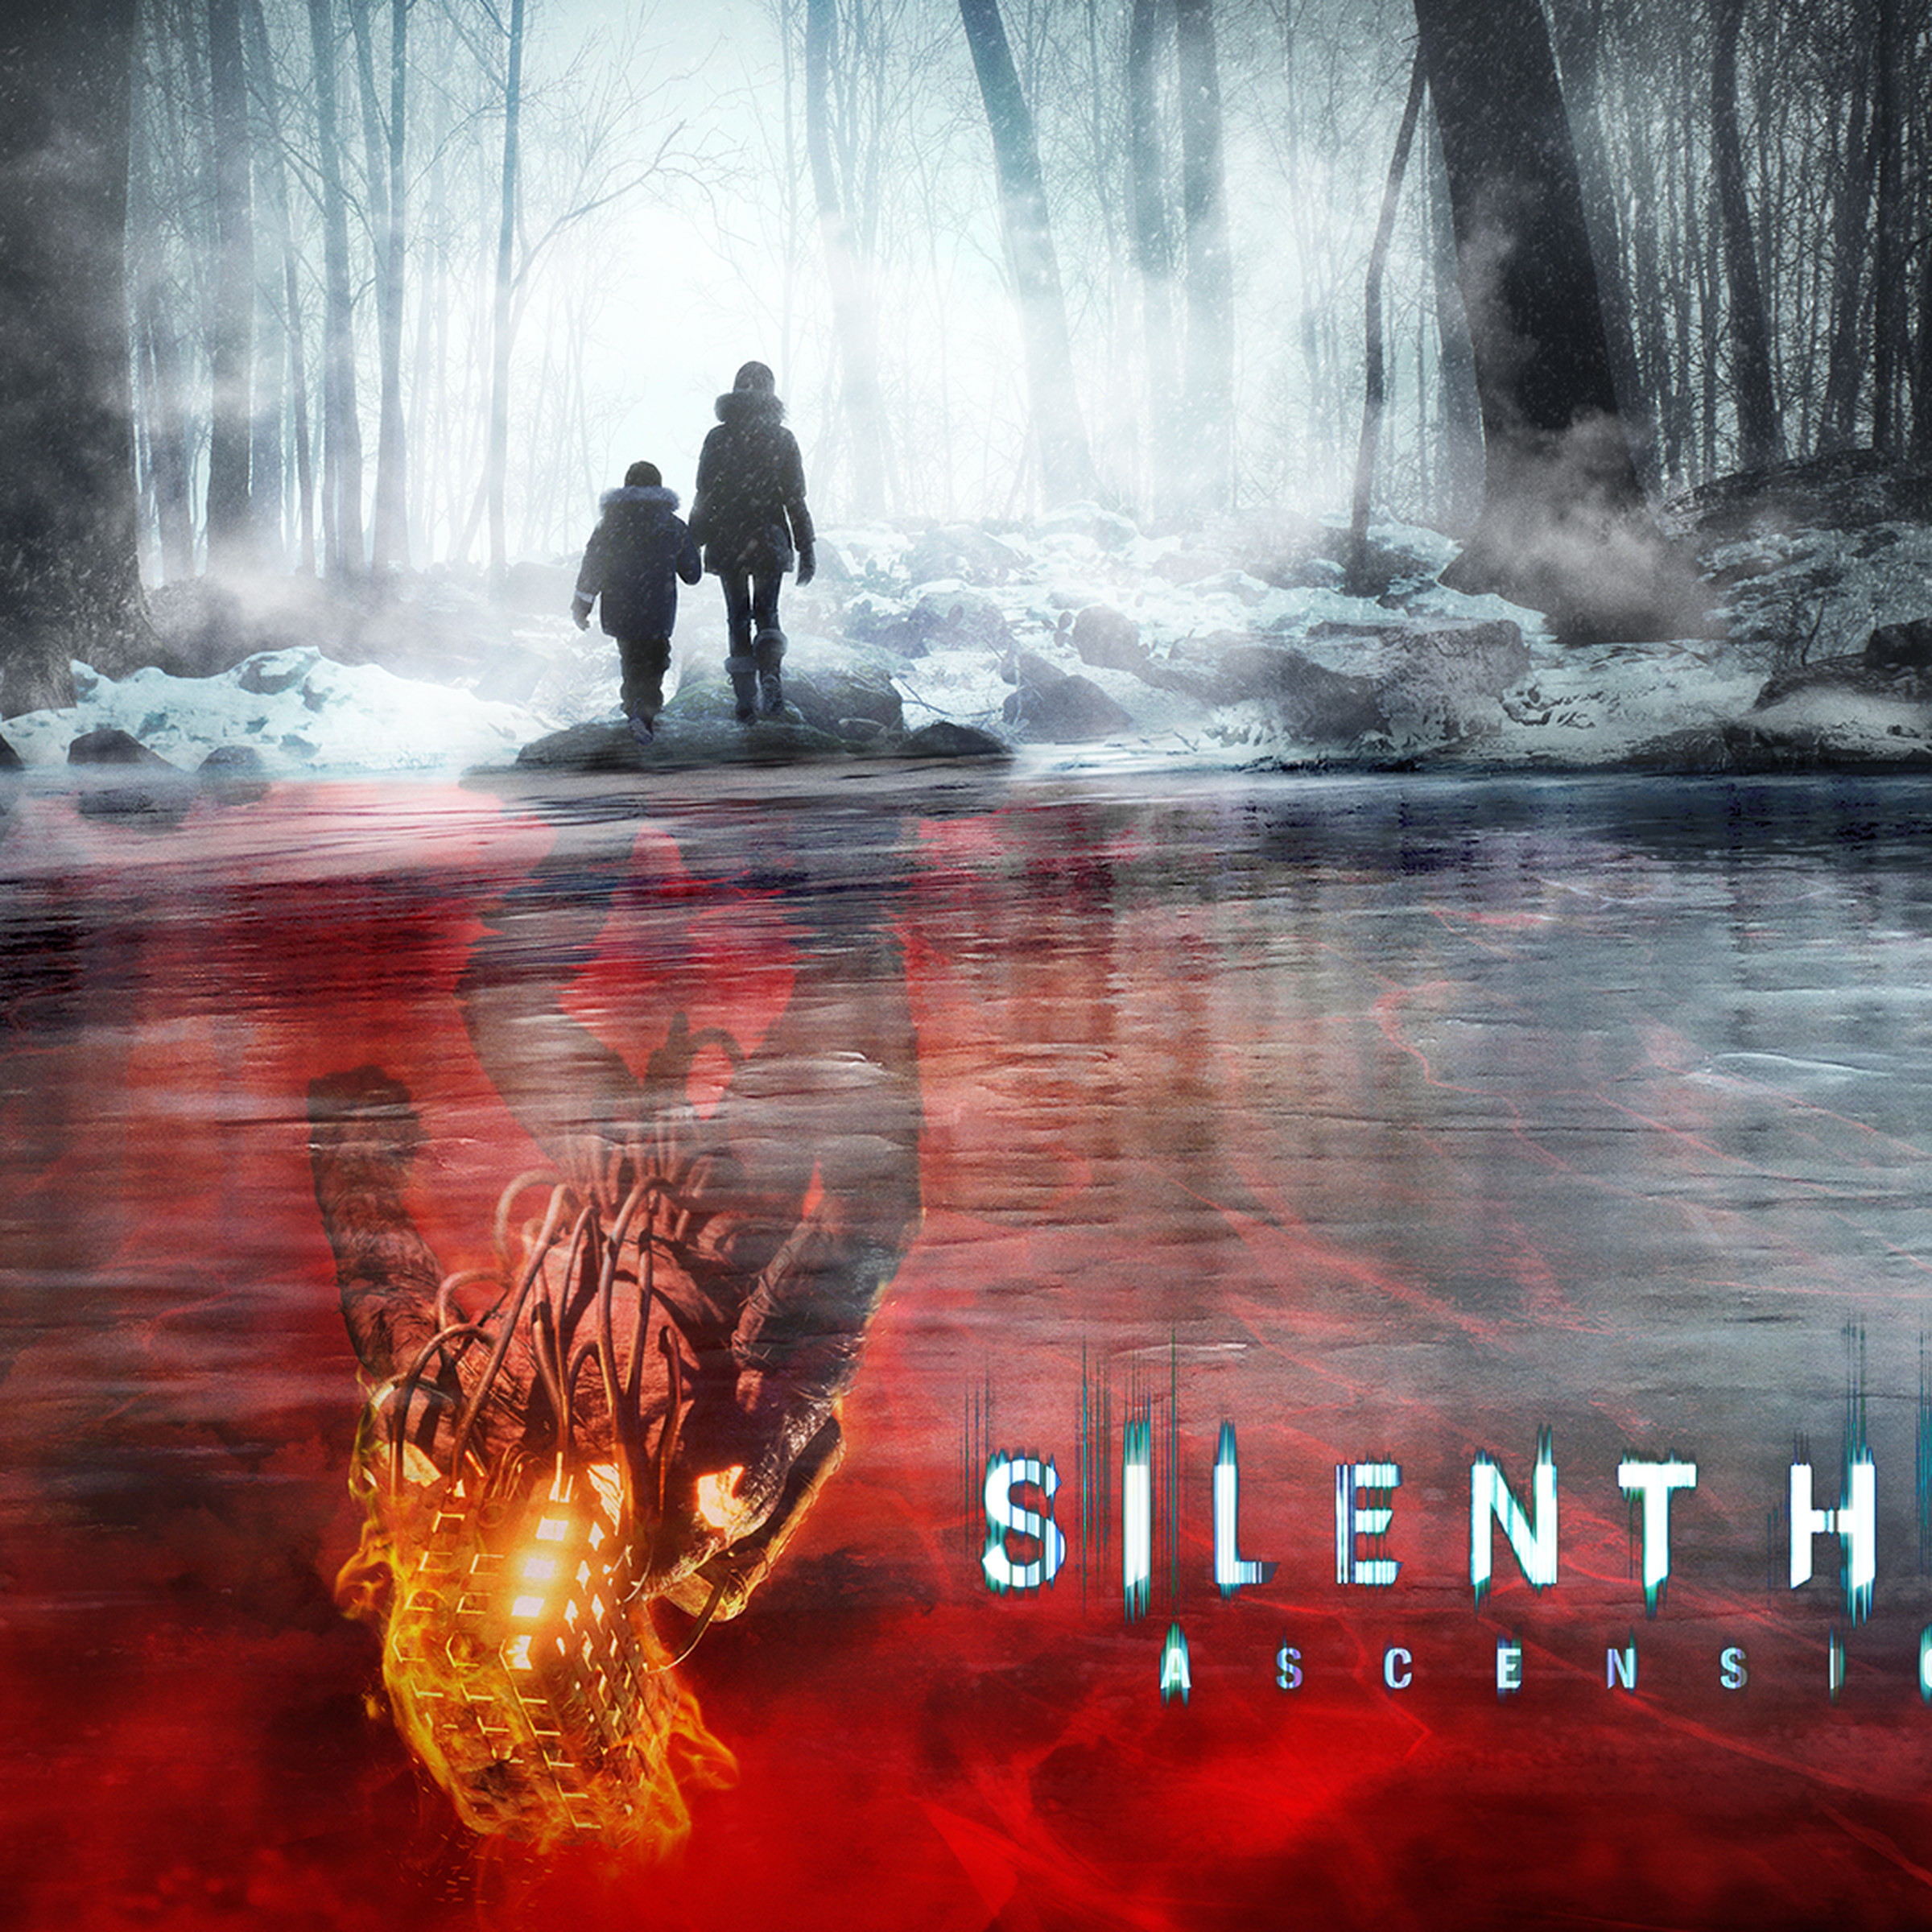 Key art for Silent Hill Ascension featuring a parent and child walking in a snowy forest as a monster lurks below them